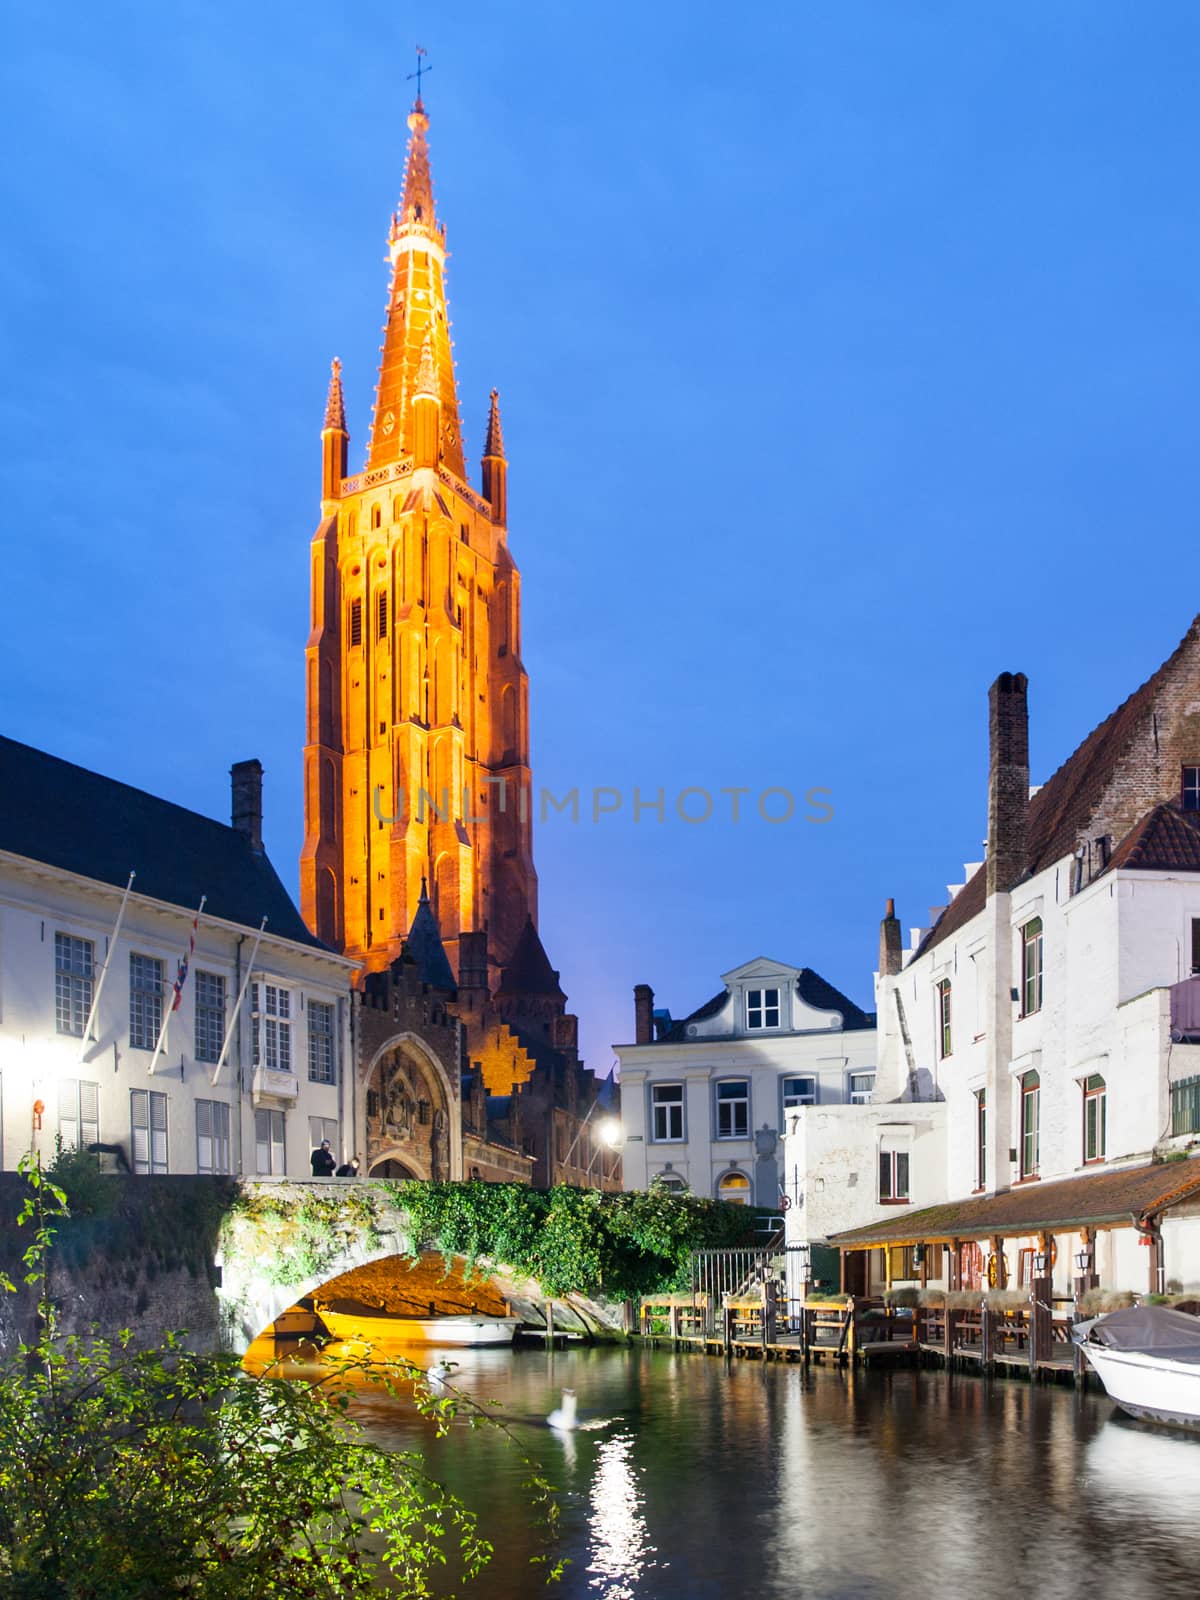 Church of Our Lady and bridge over water canal by night, Bruges, Belgium.